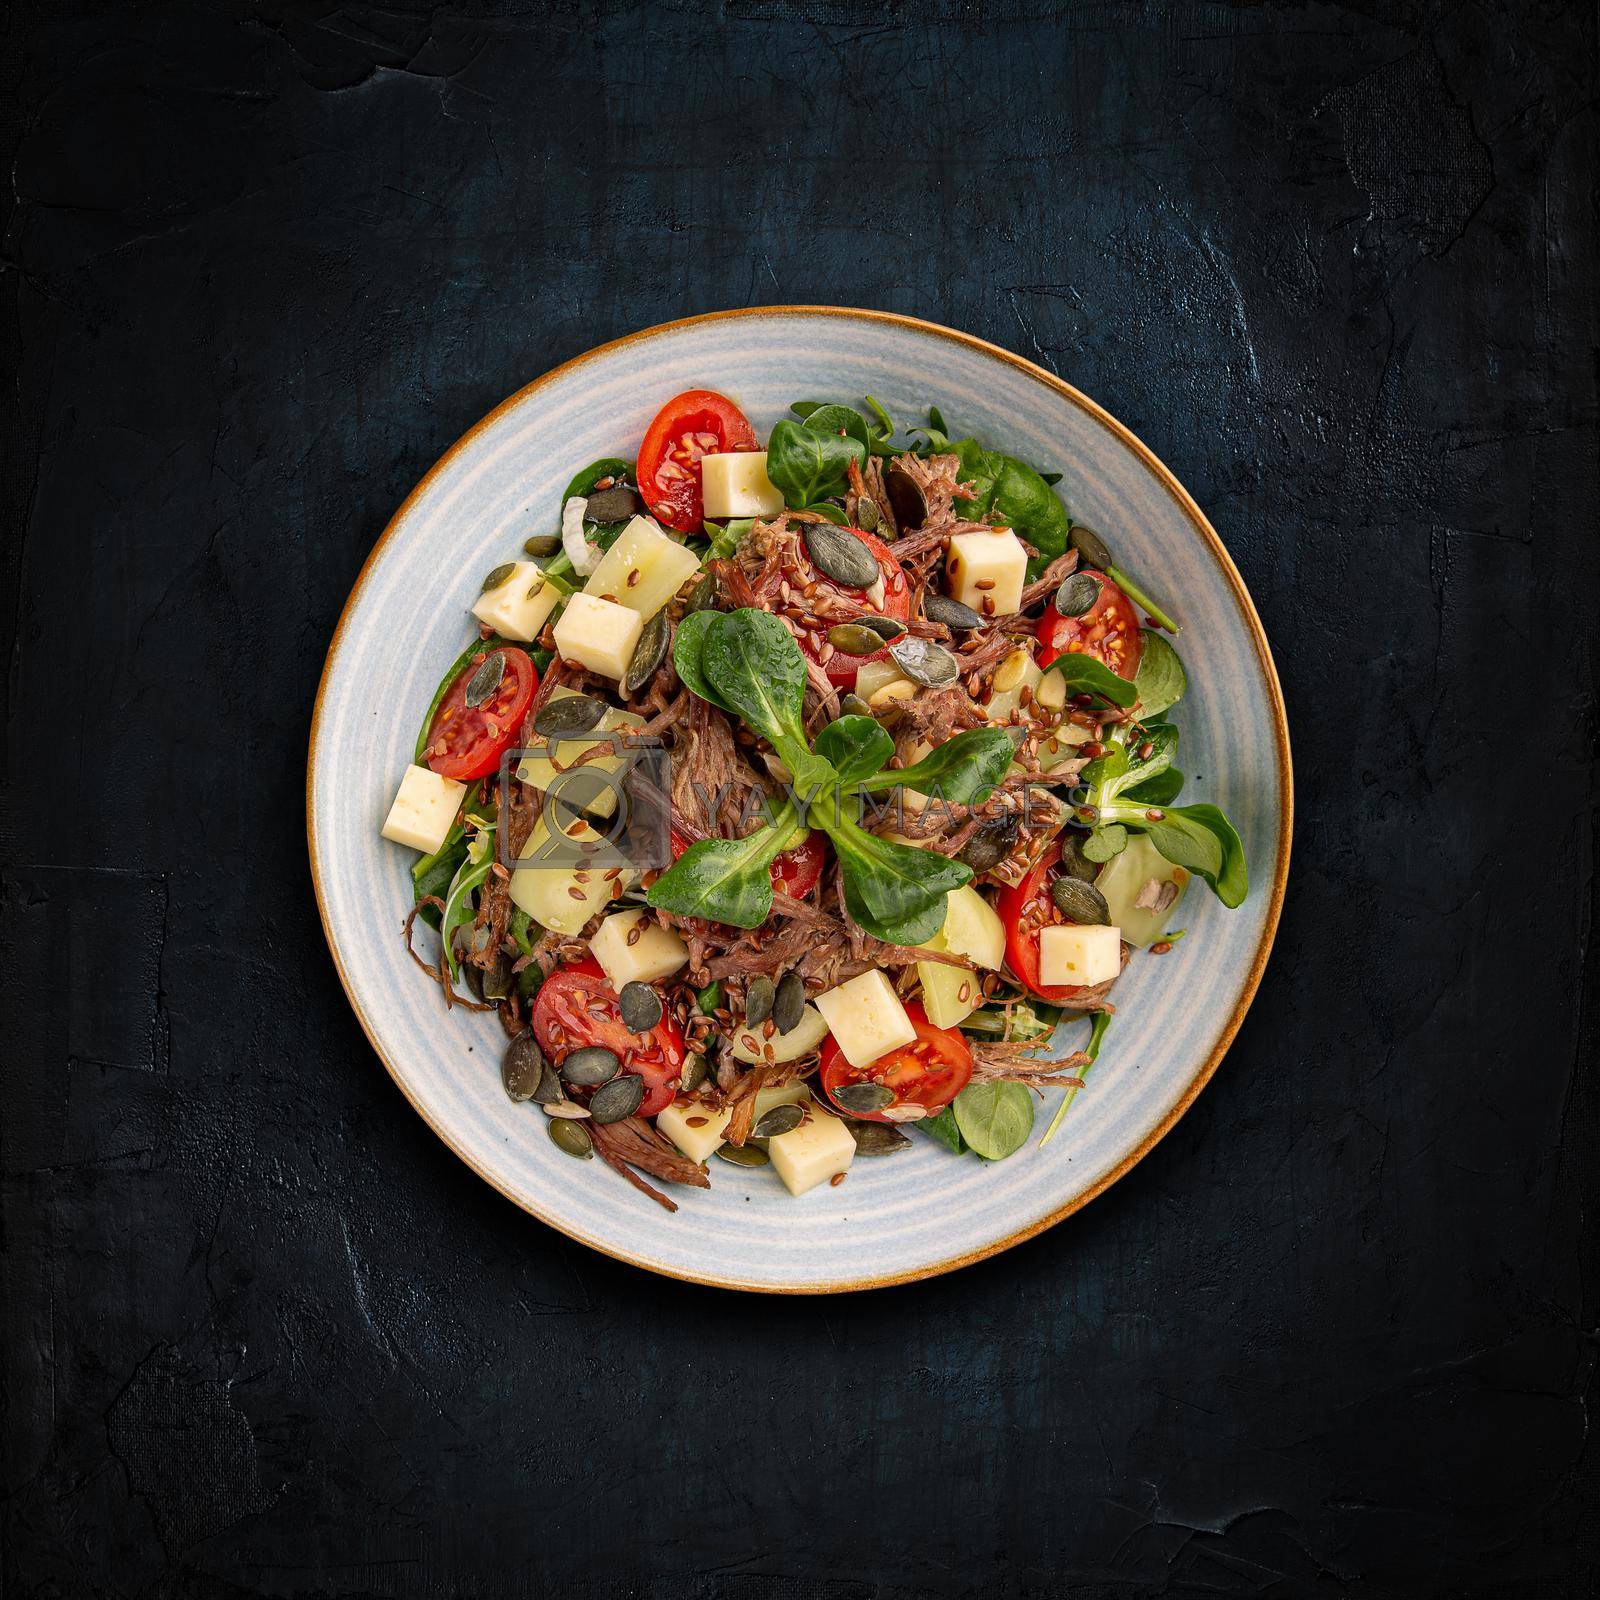 Pulled beef salad with cherry tomatoes and greens vegetables Healthy food concept.